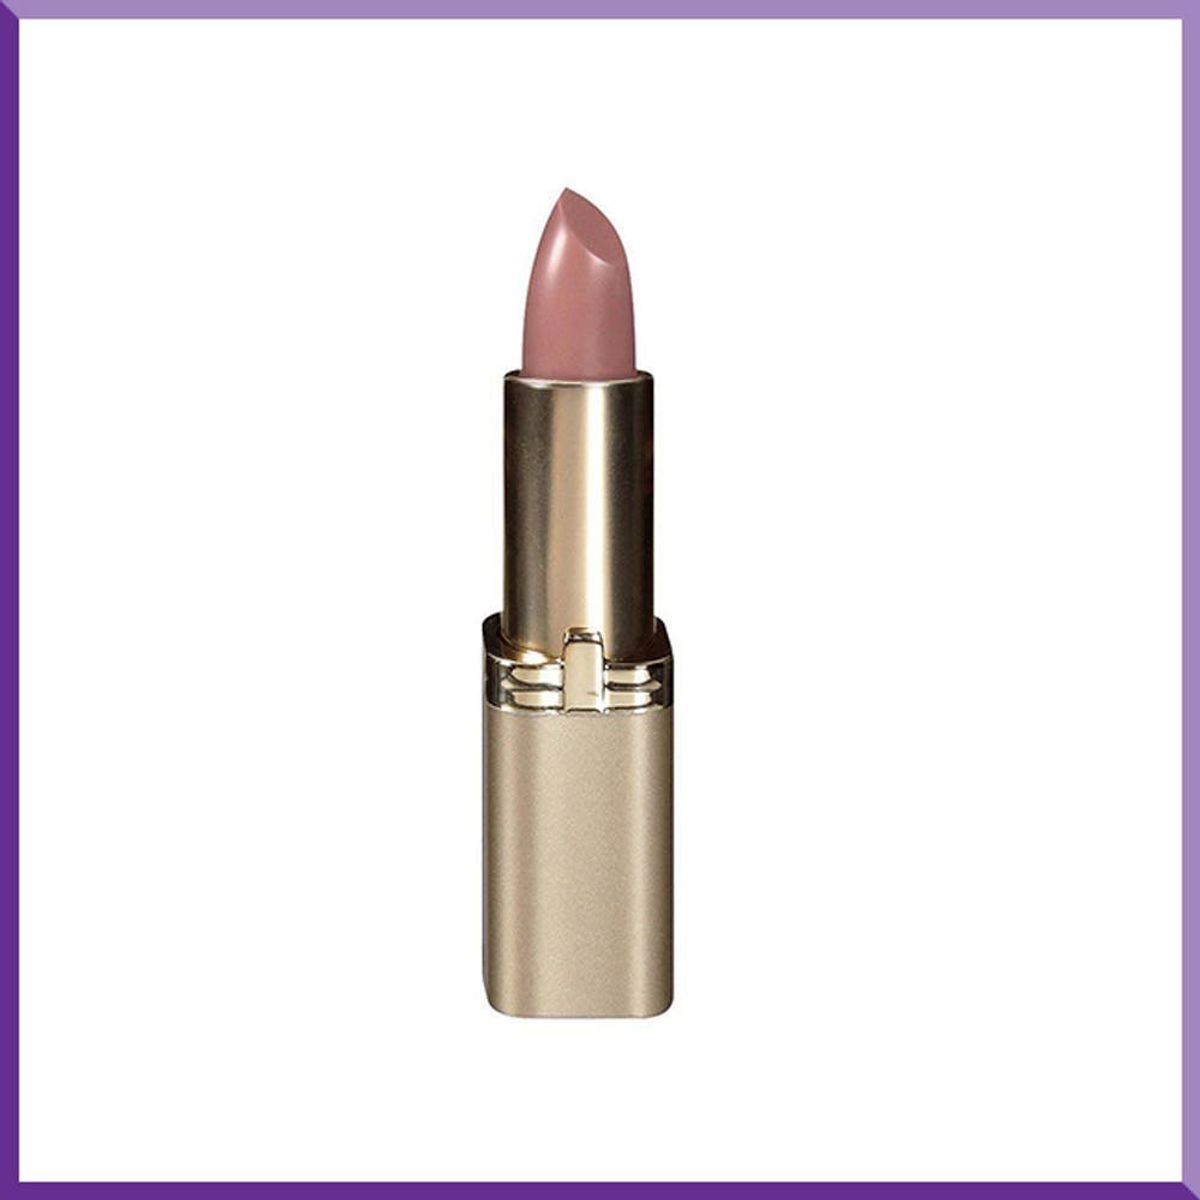 Celebrate National Lipstick Day With 9 Nude Lipsticks for Summer